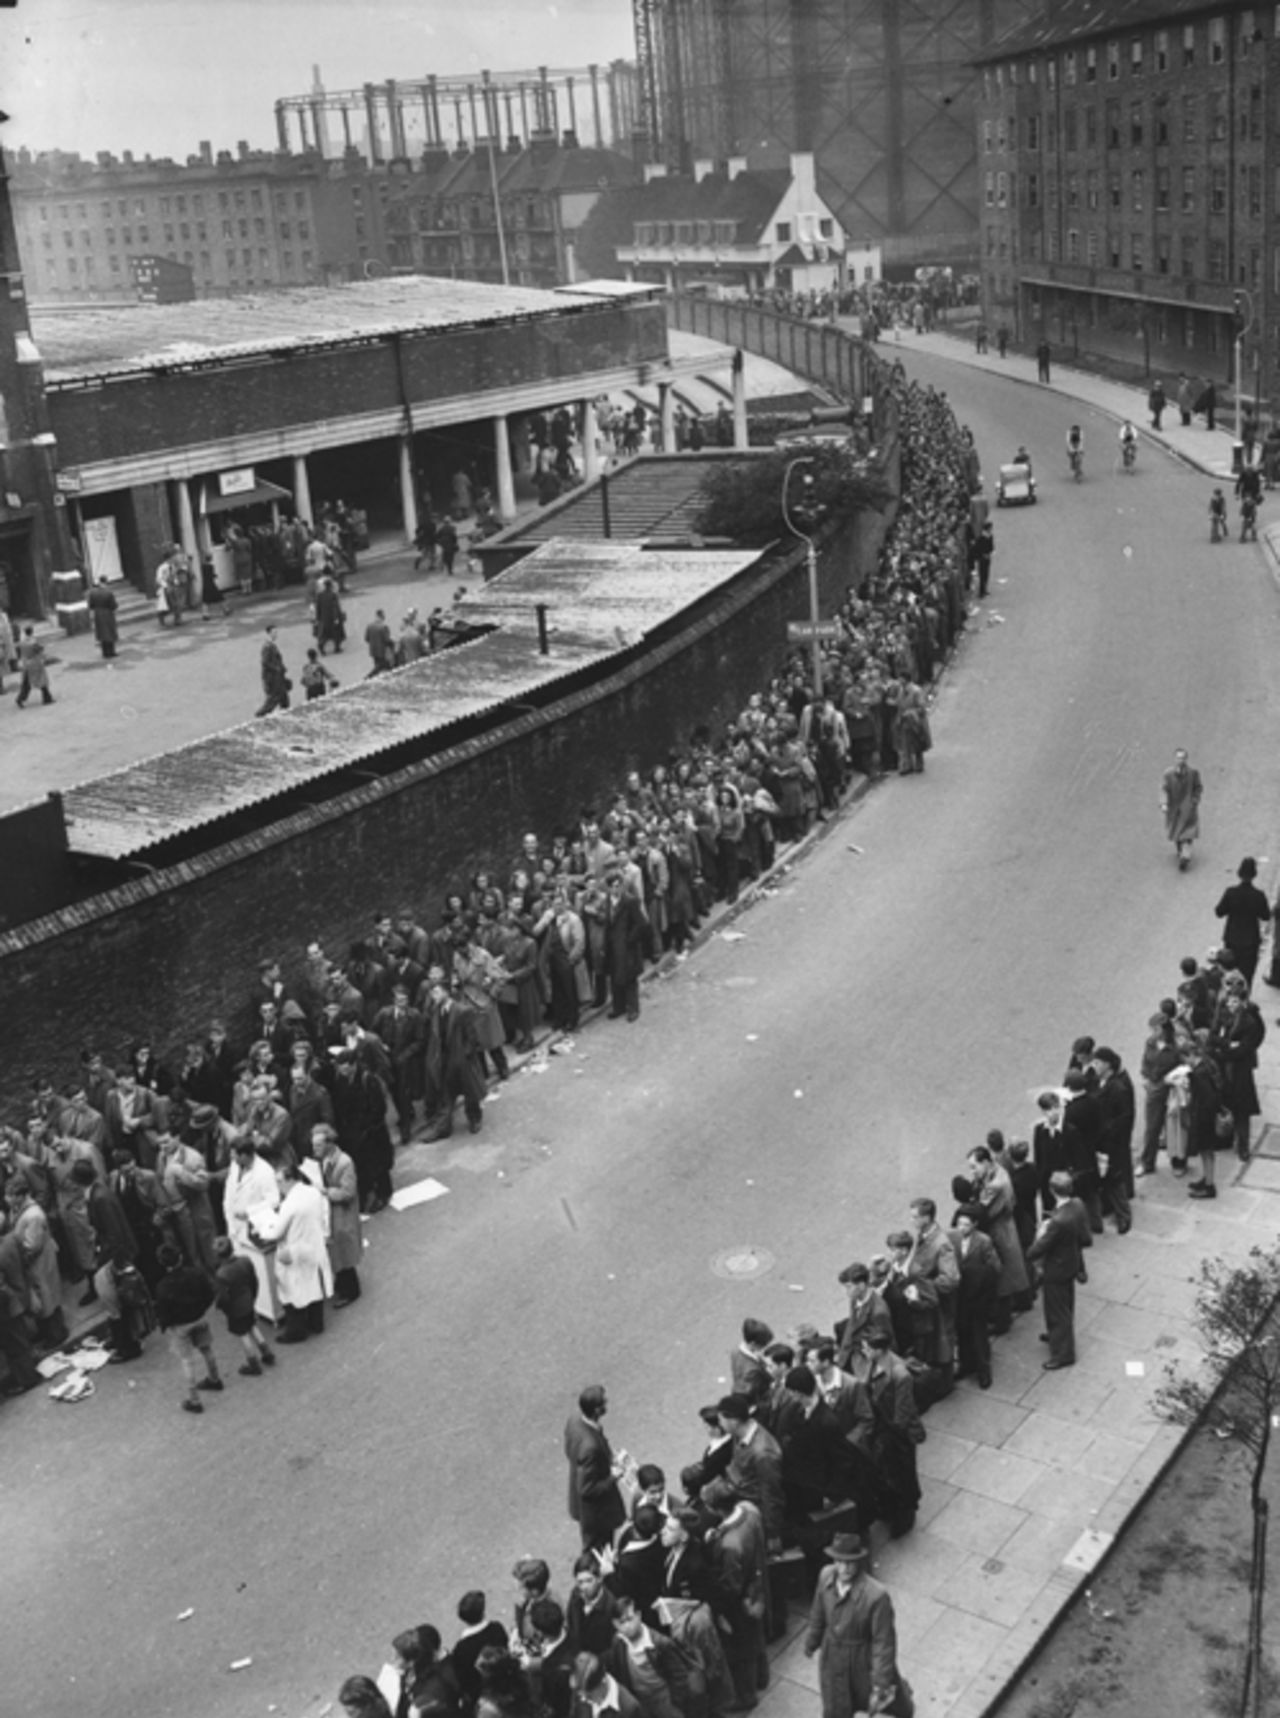 Crowds queue outside The Oval ahead of the start of the final Test, England v Australia, 5th Test, The Oval, August 14, 1948